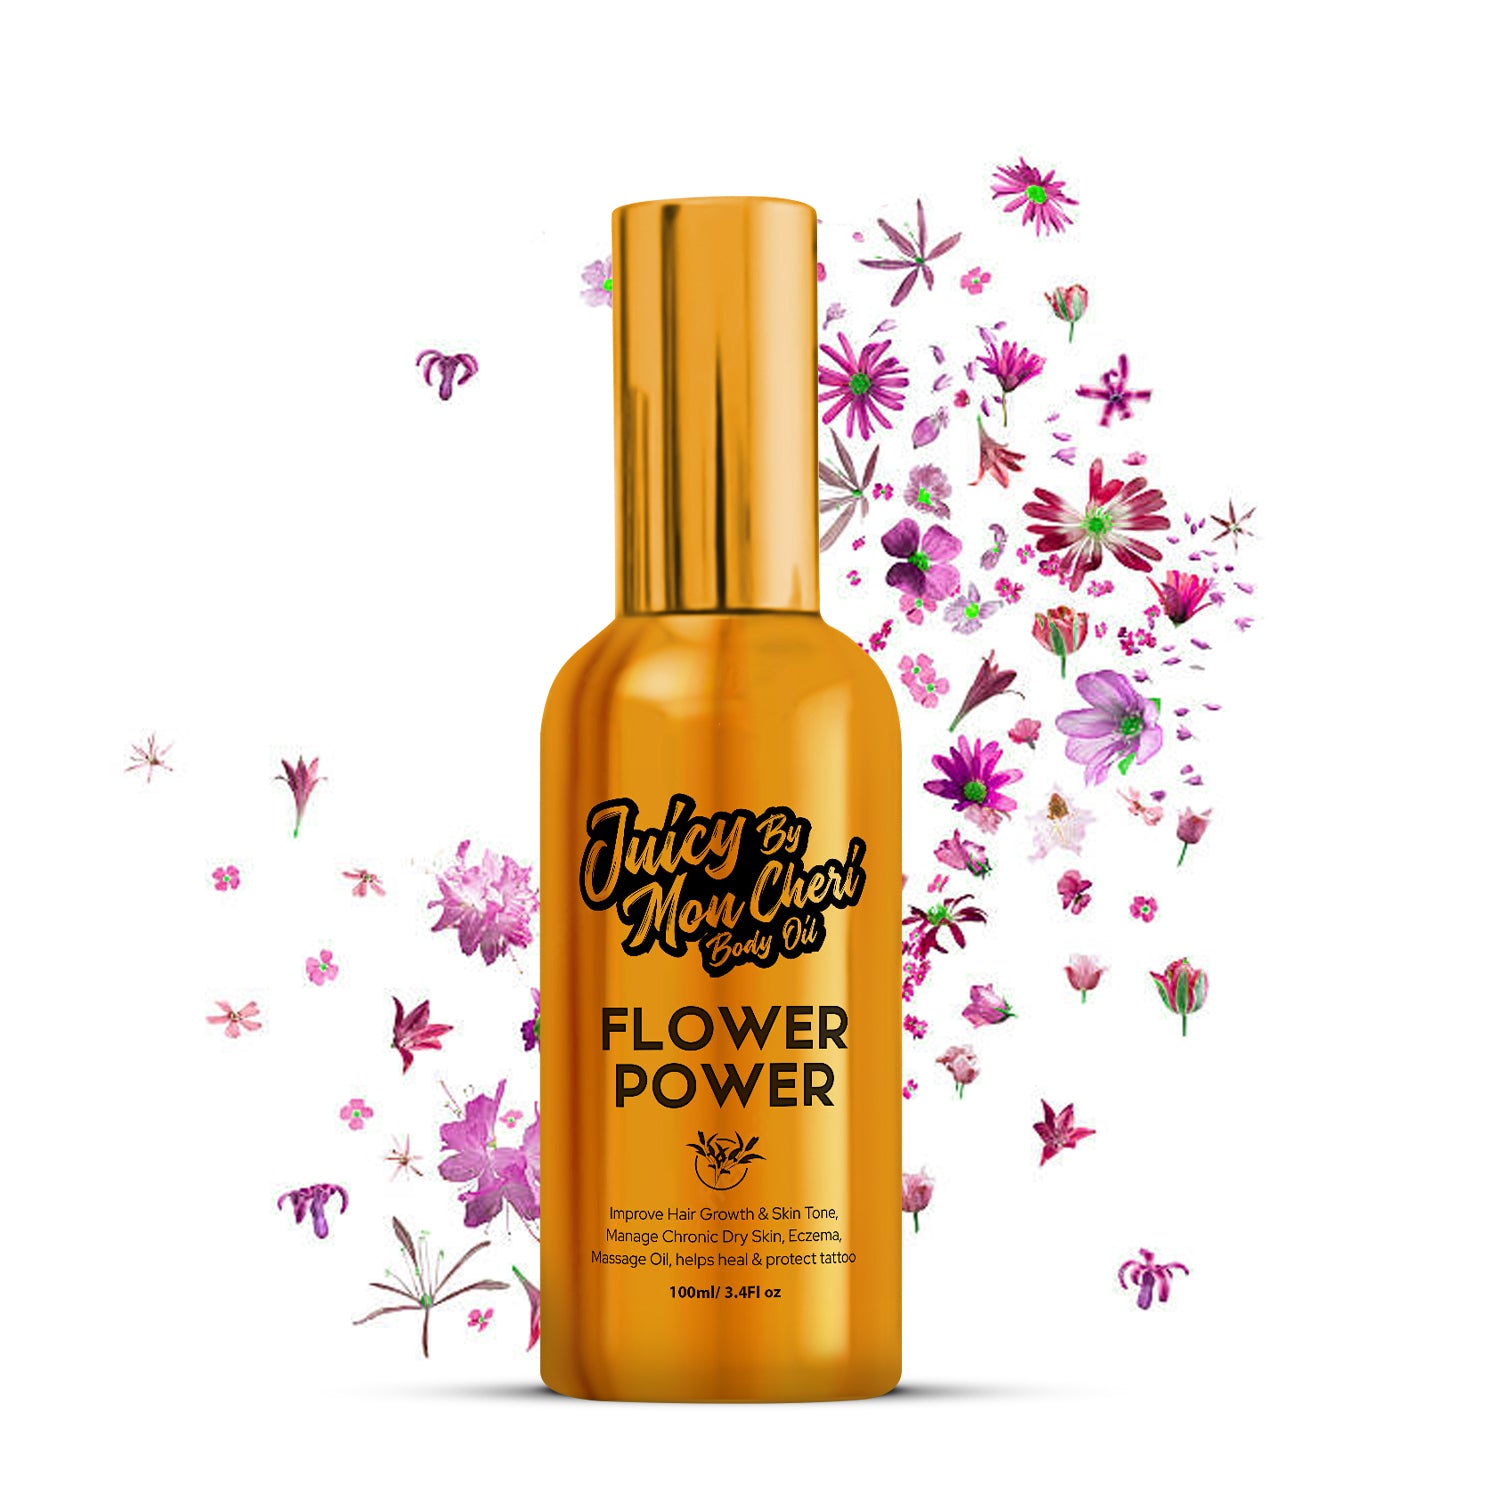 Nourish Your Skin with the Floral Essence of Juicy By Mon Cheri Body Oil